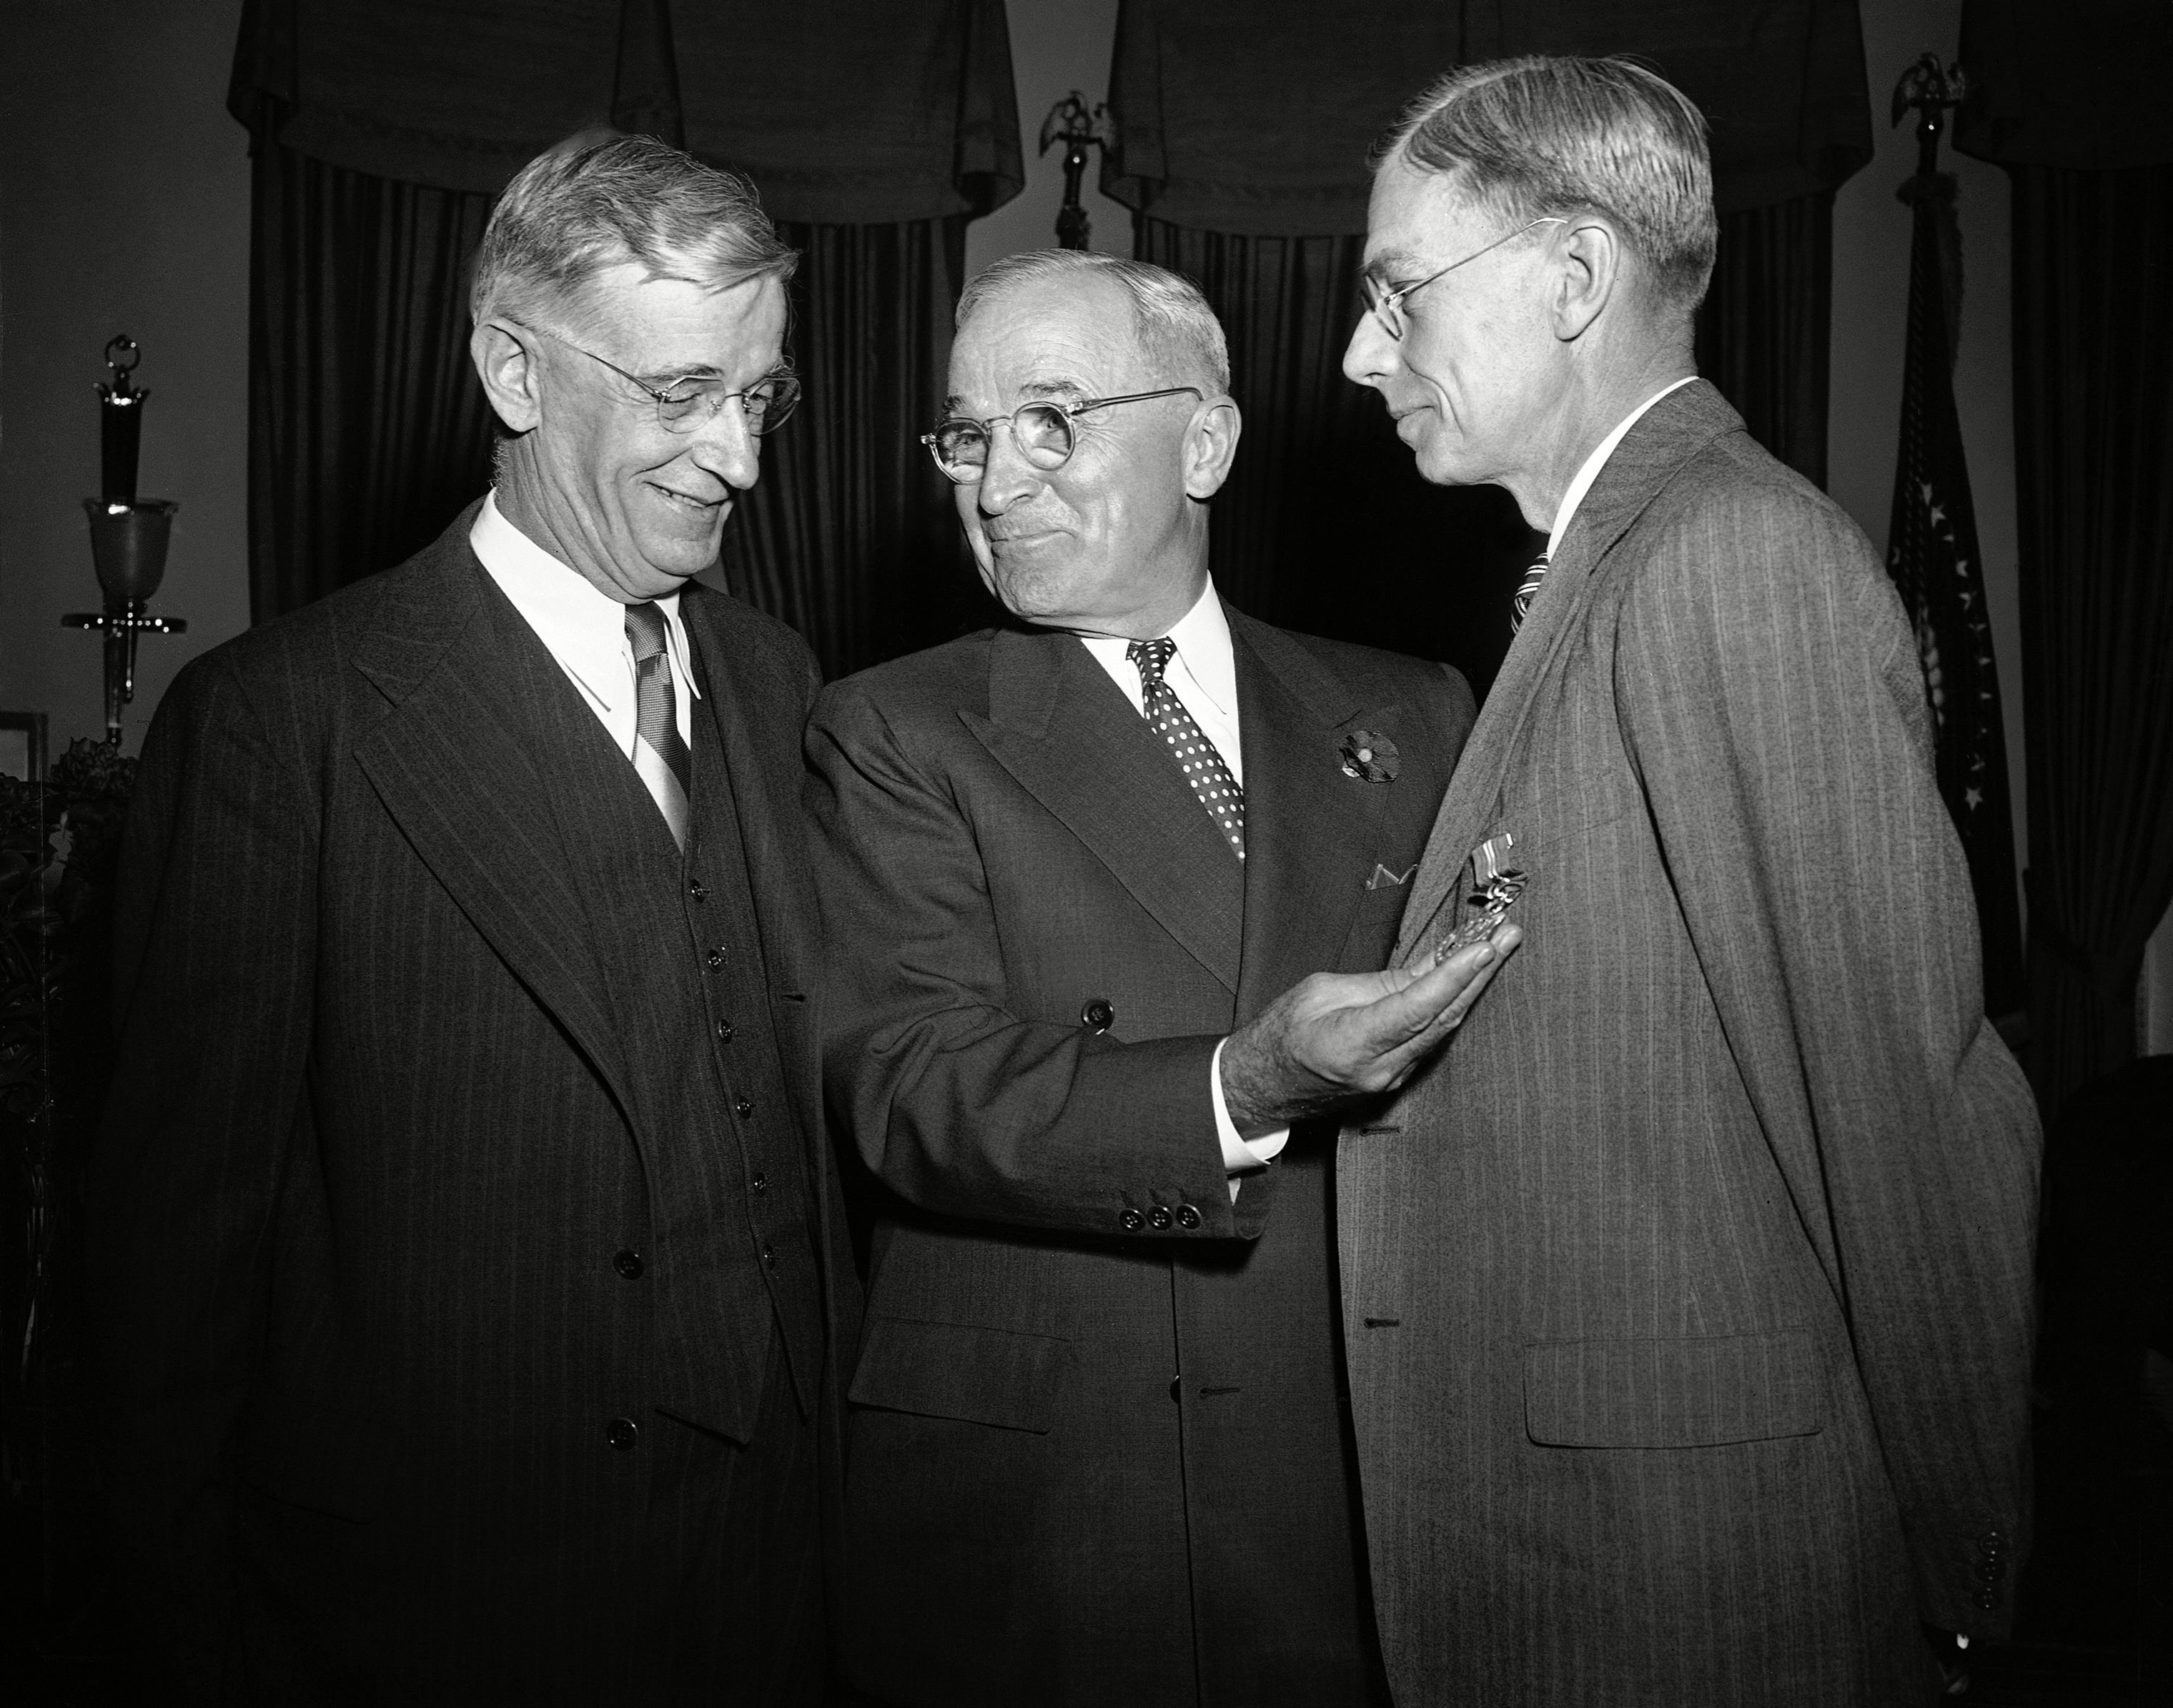 President Harry Truman, center, presents the Medal for Merit to Dr. Vannevar Bush, left, and Dr. James Bryant Conant, right, for their atomic research. (AP/REX/Shutterstock)